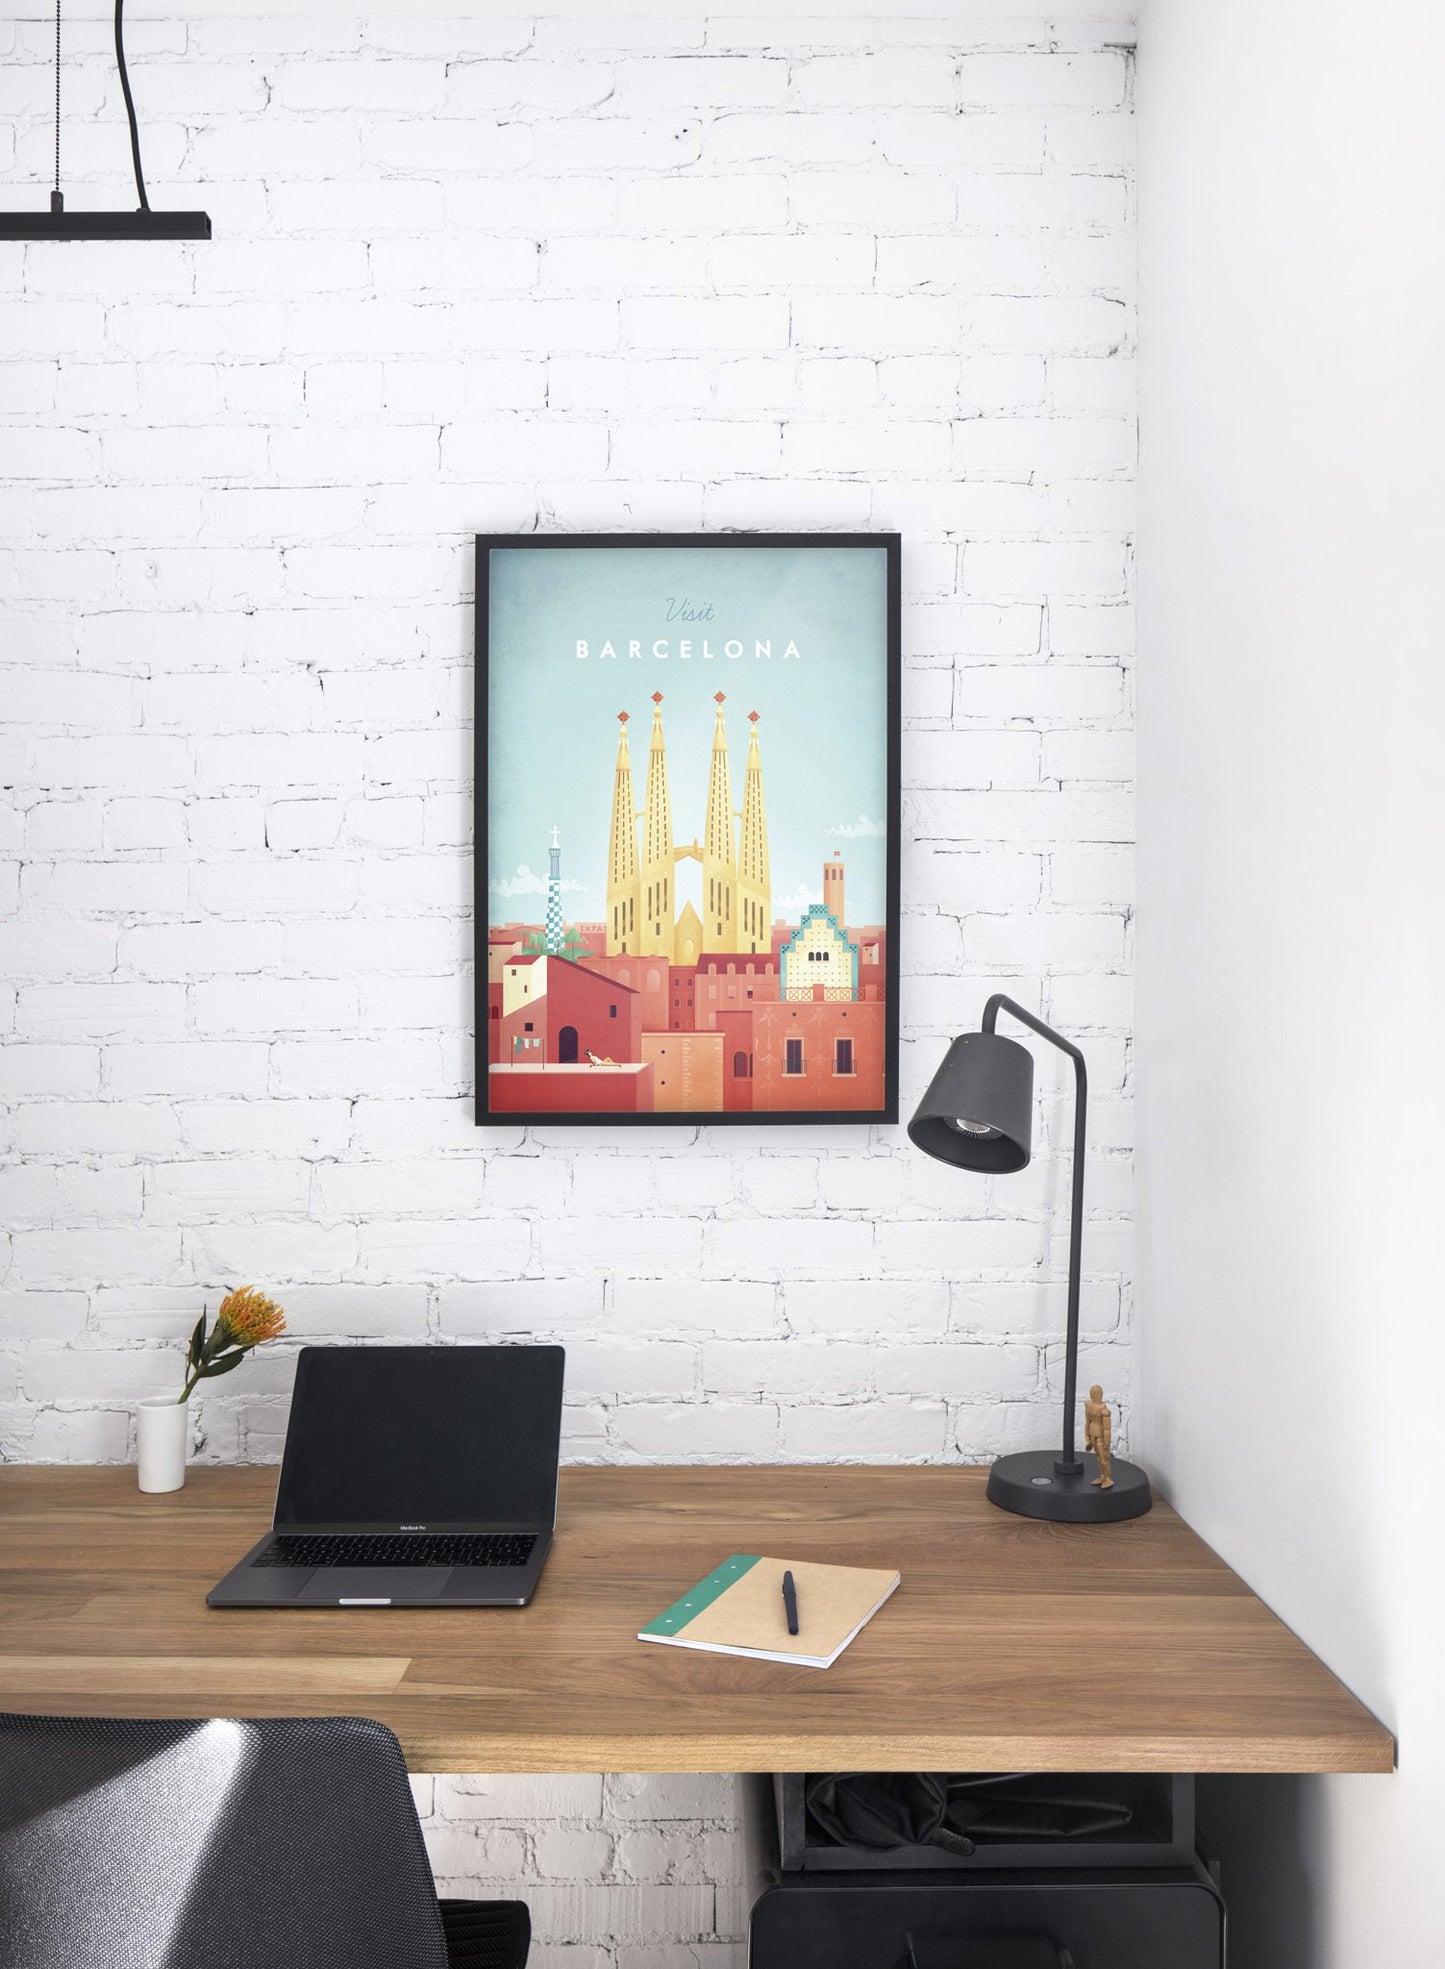 Modern minimalist poster by Opposite Wall with illustration of Barcelona, Spain - Personal Office Space